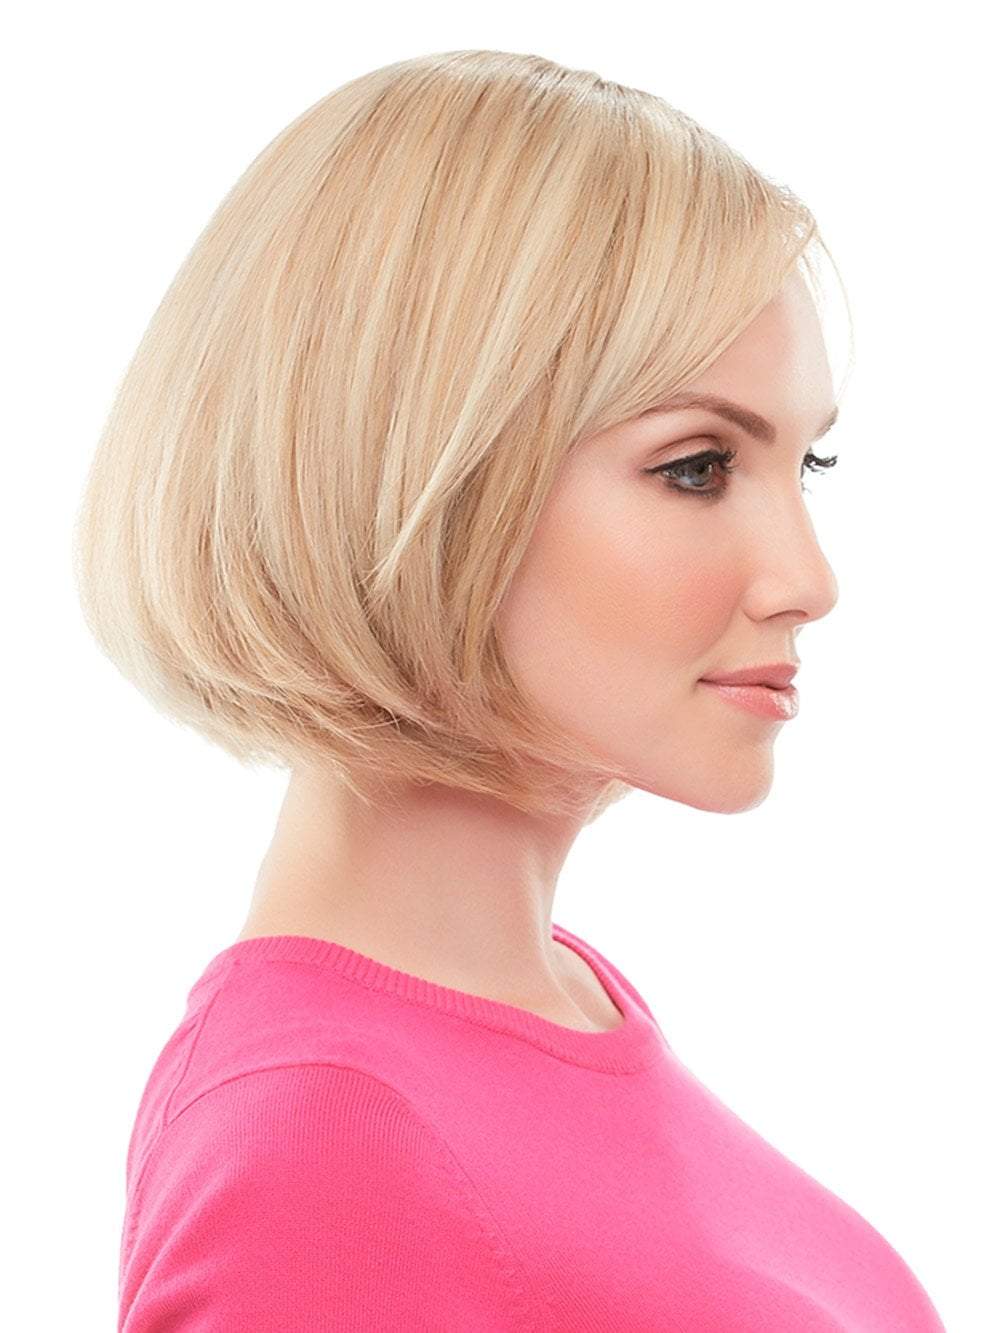 The top quality Remy human hair can be styled to blend seamlessly with short natural hair